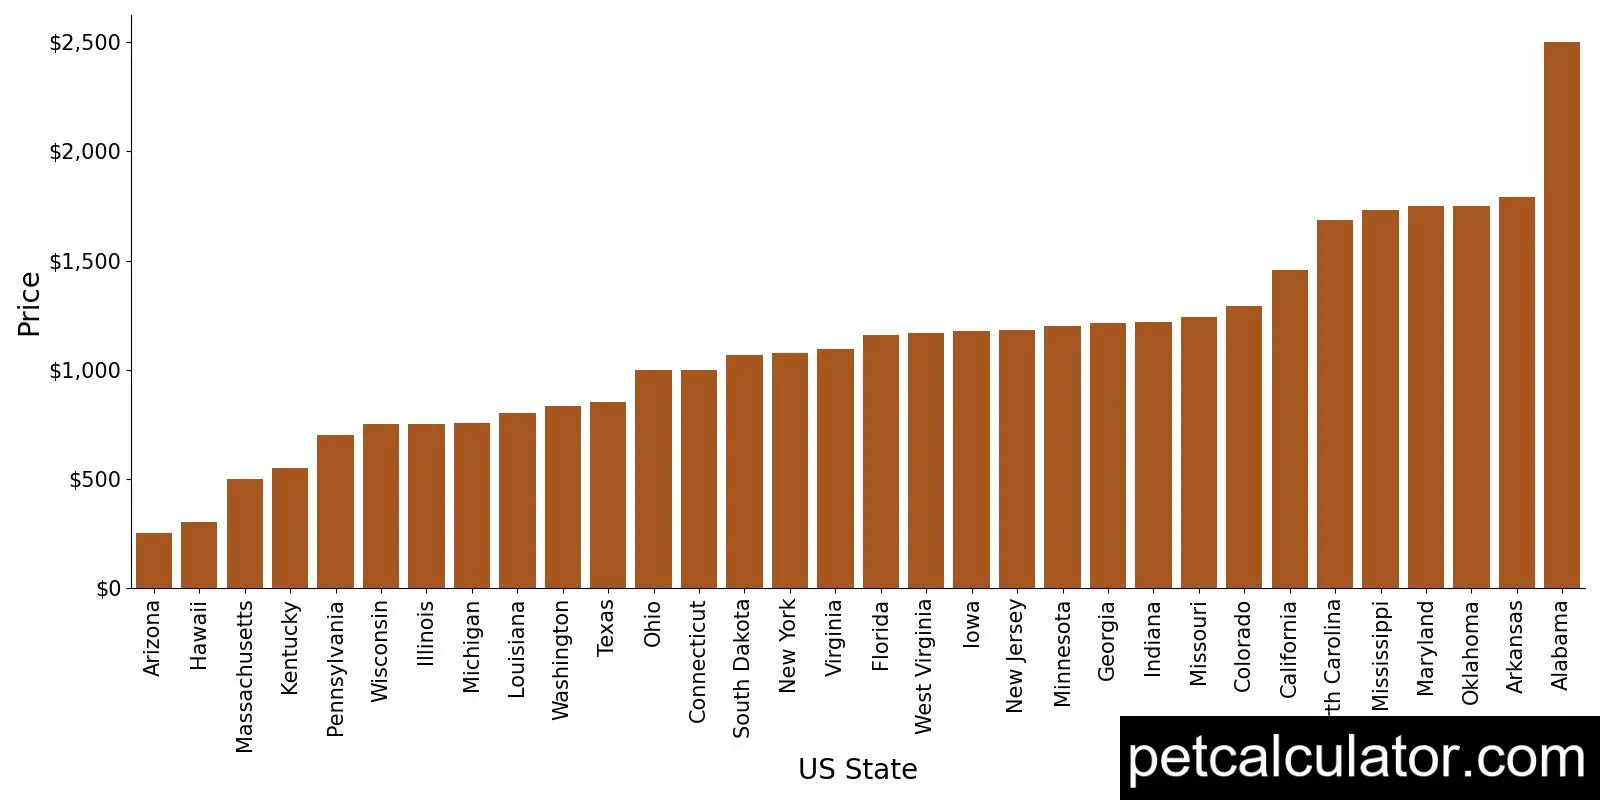 Price of Miniature Pinscher by US State 